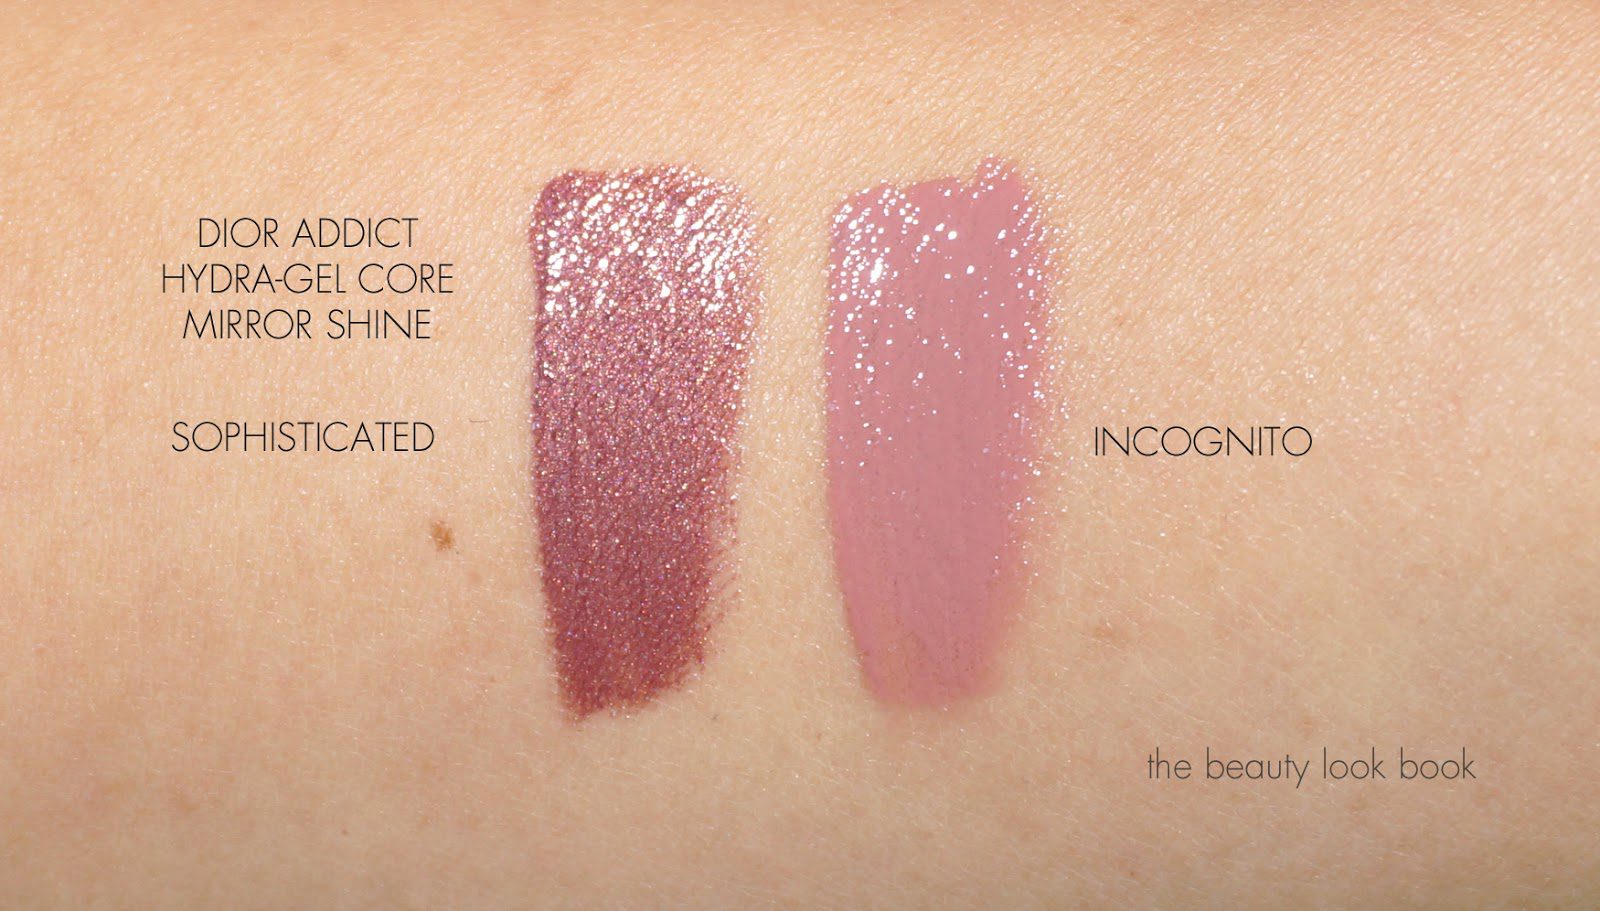 $25 LIP GLOSS?! Shiseido Shimmer Gel Gloss Collection Swatches + Review 